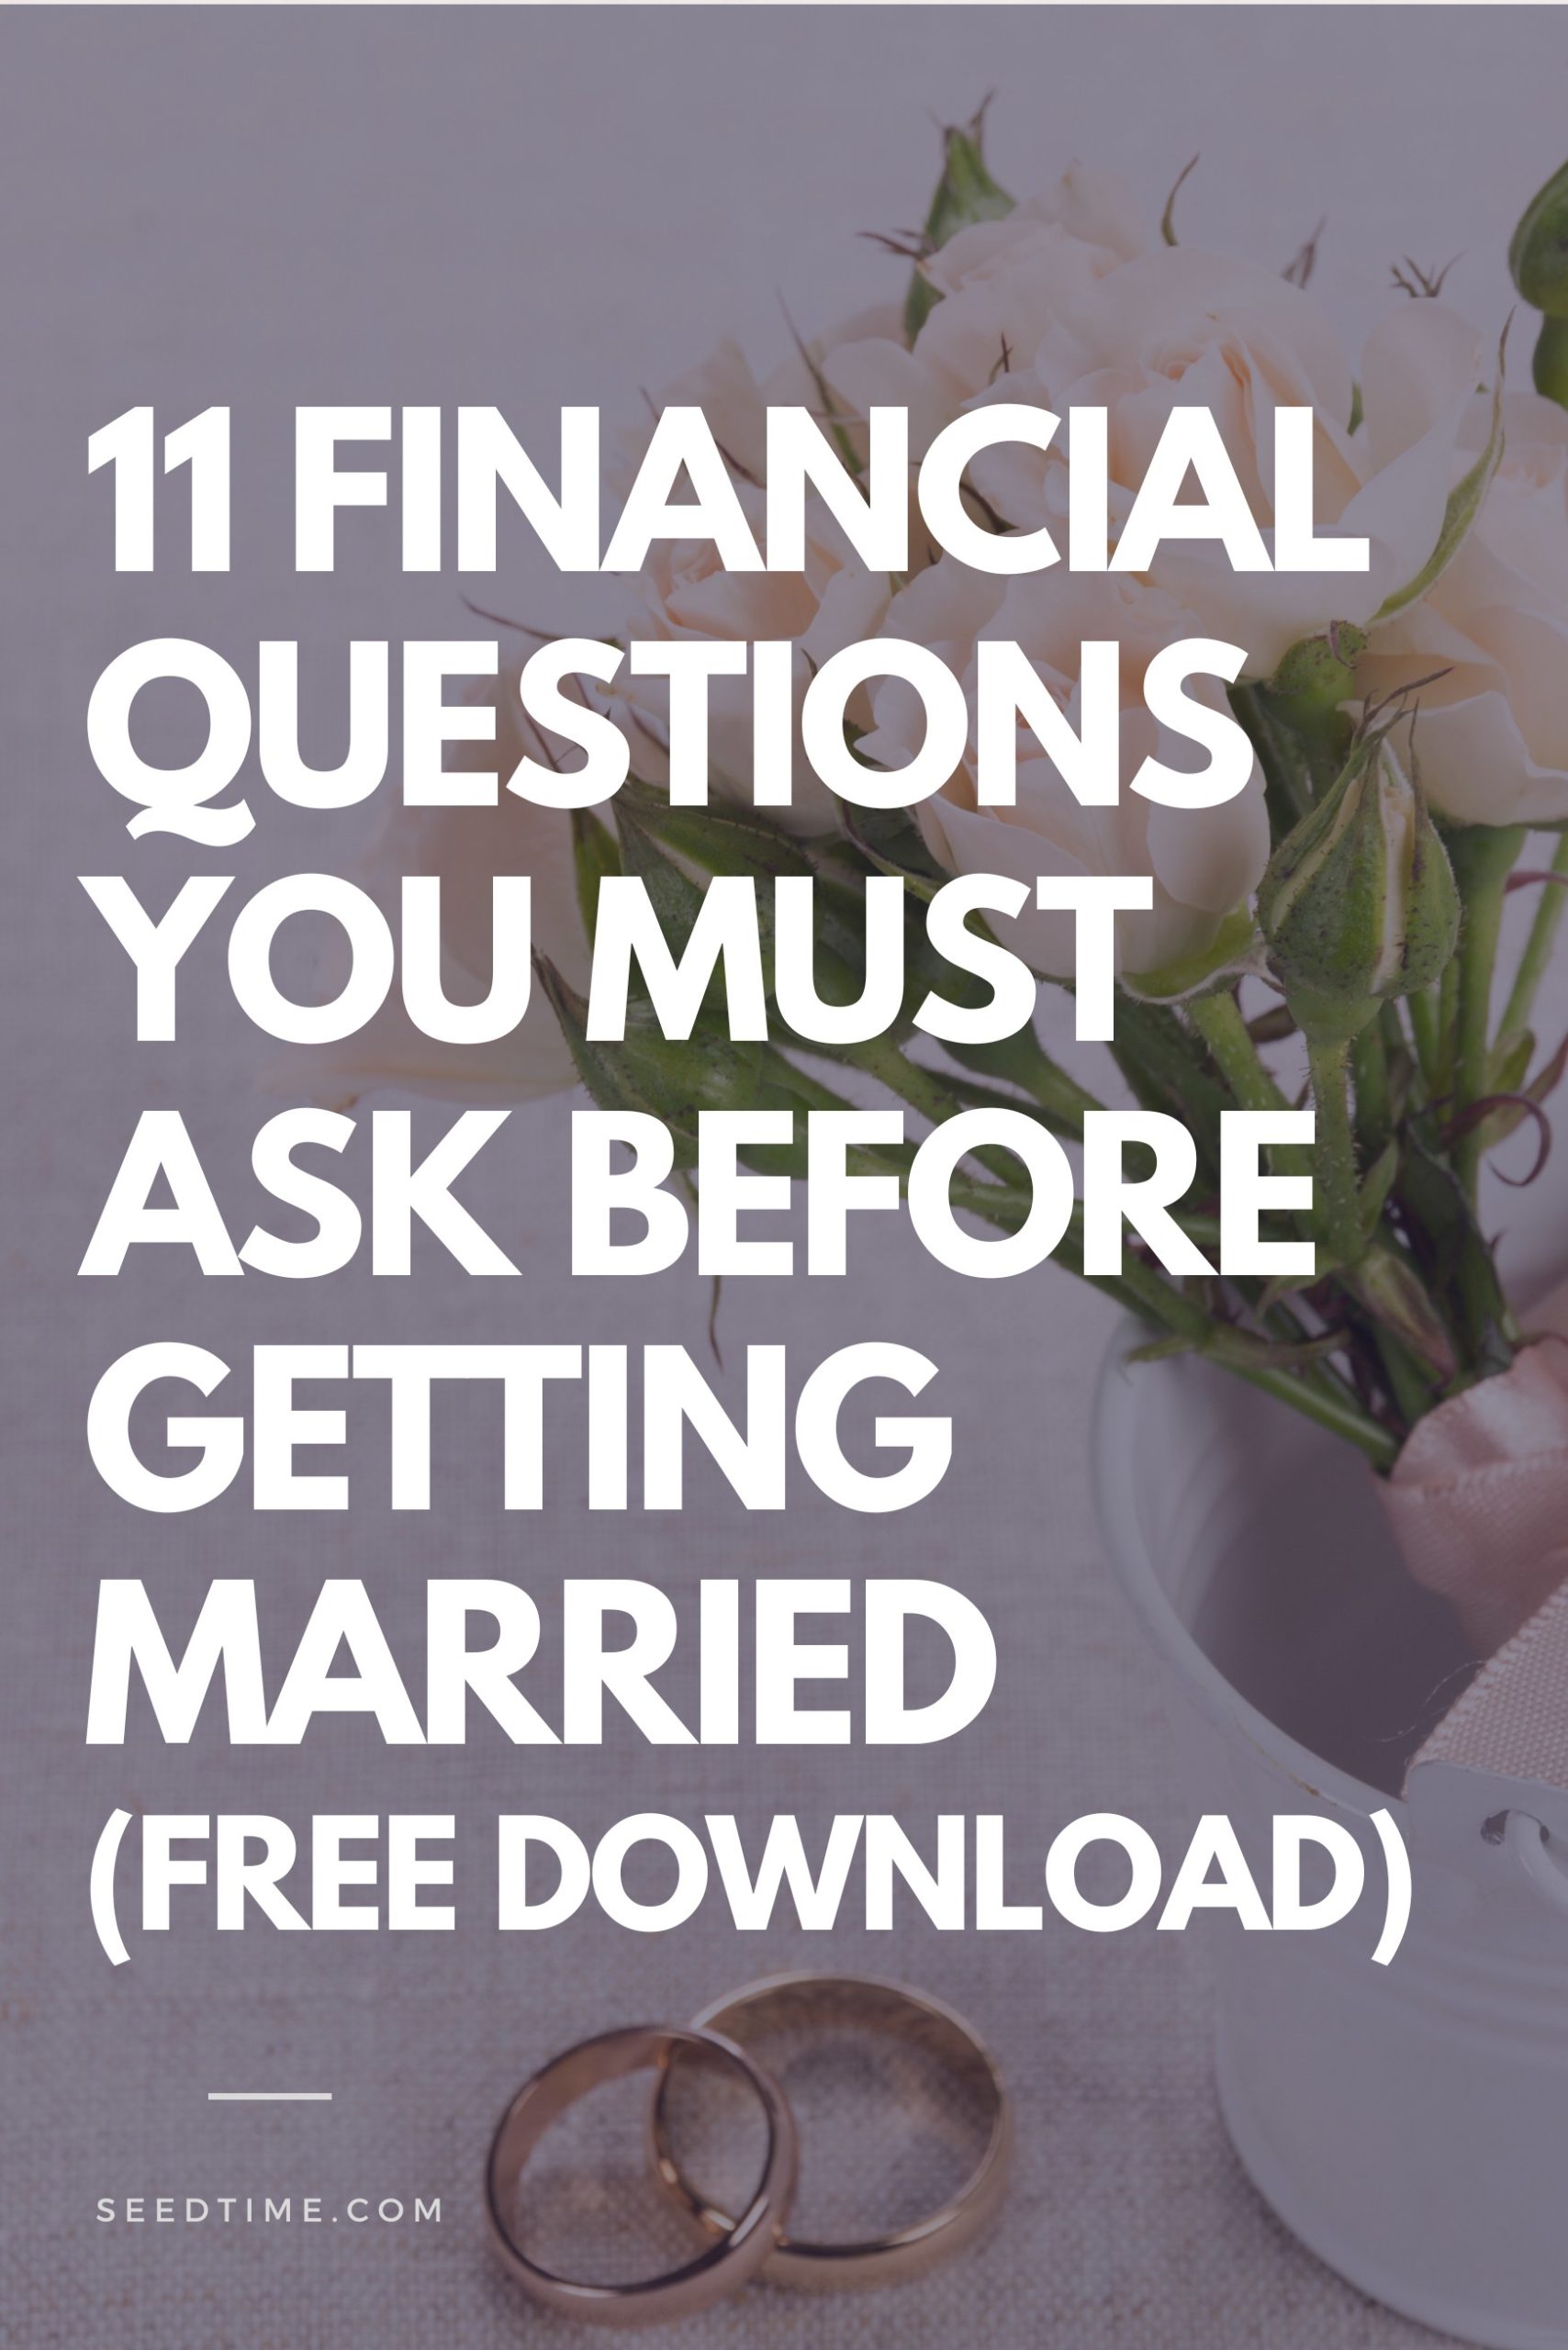 11 Financial Questions You Must Ask Before Getting Married (Free Download)